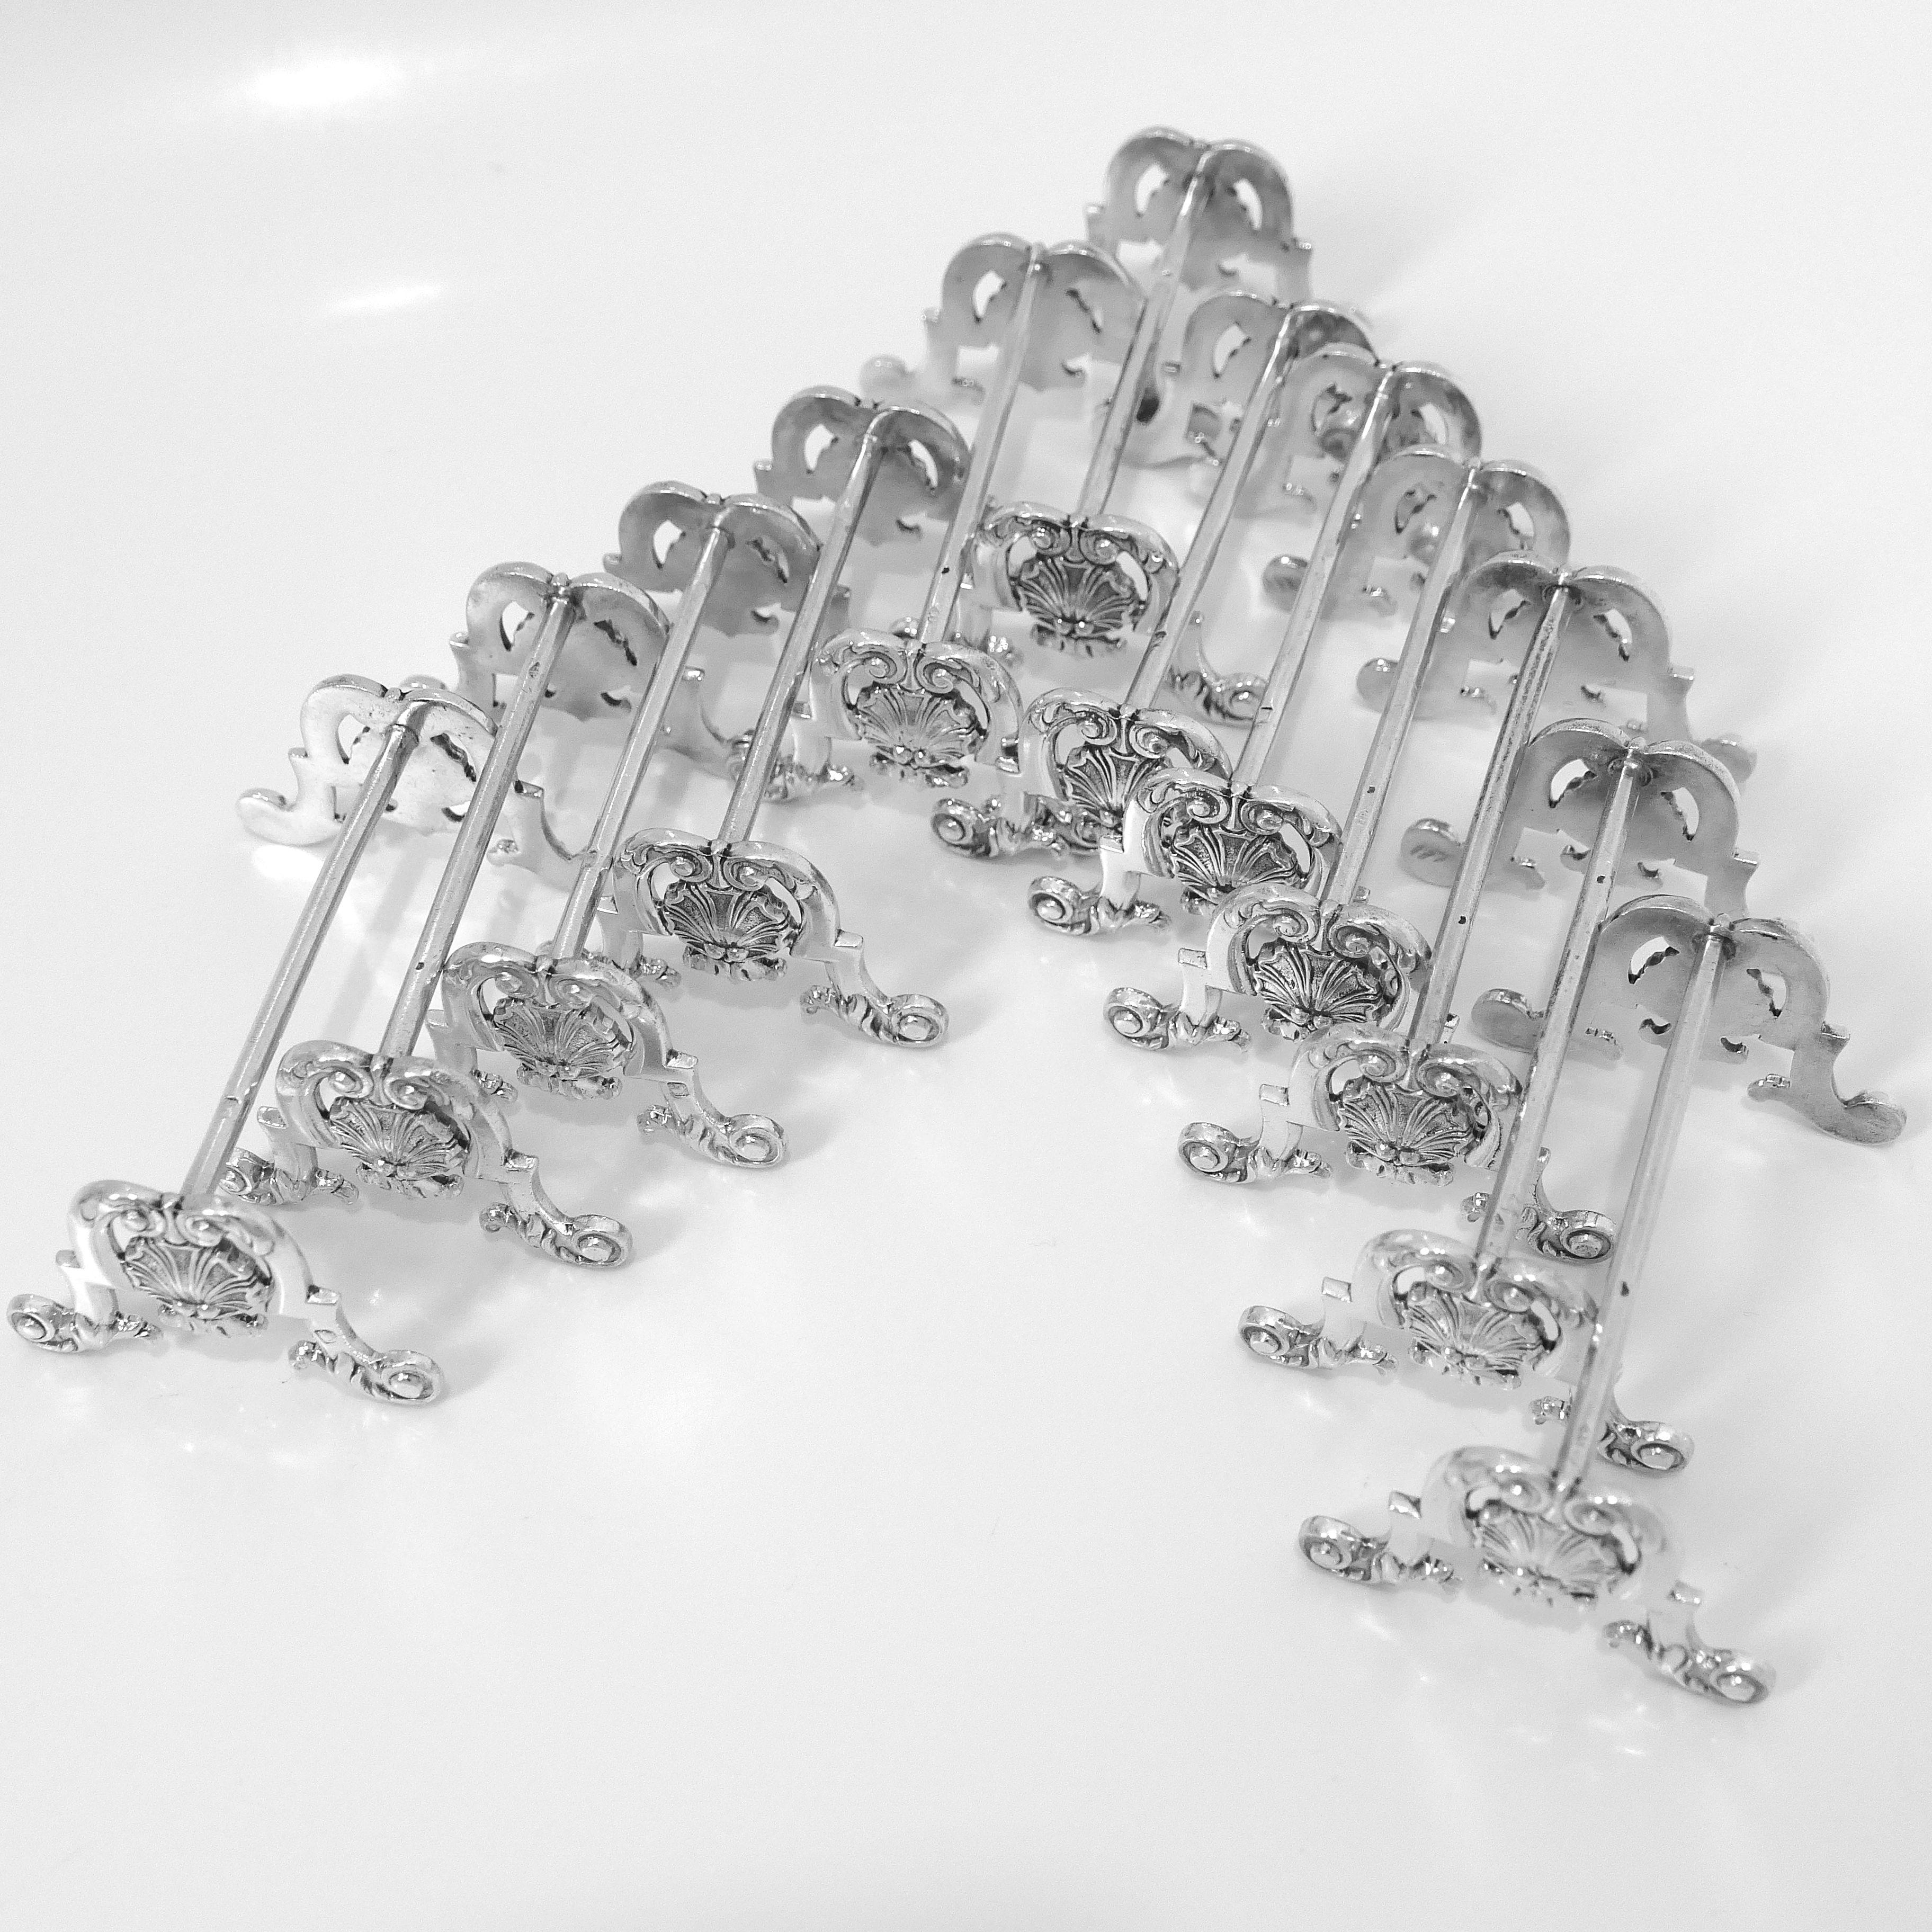 Puiforcat Rare French All Sterling Silver Knife Rests Set of 12 Pieces For Sale 3